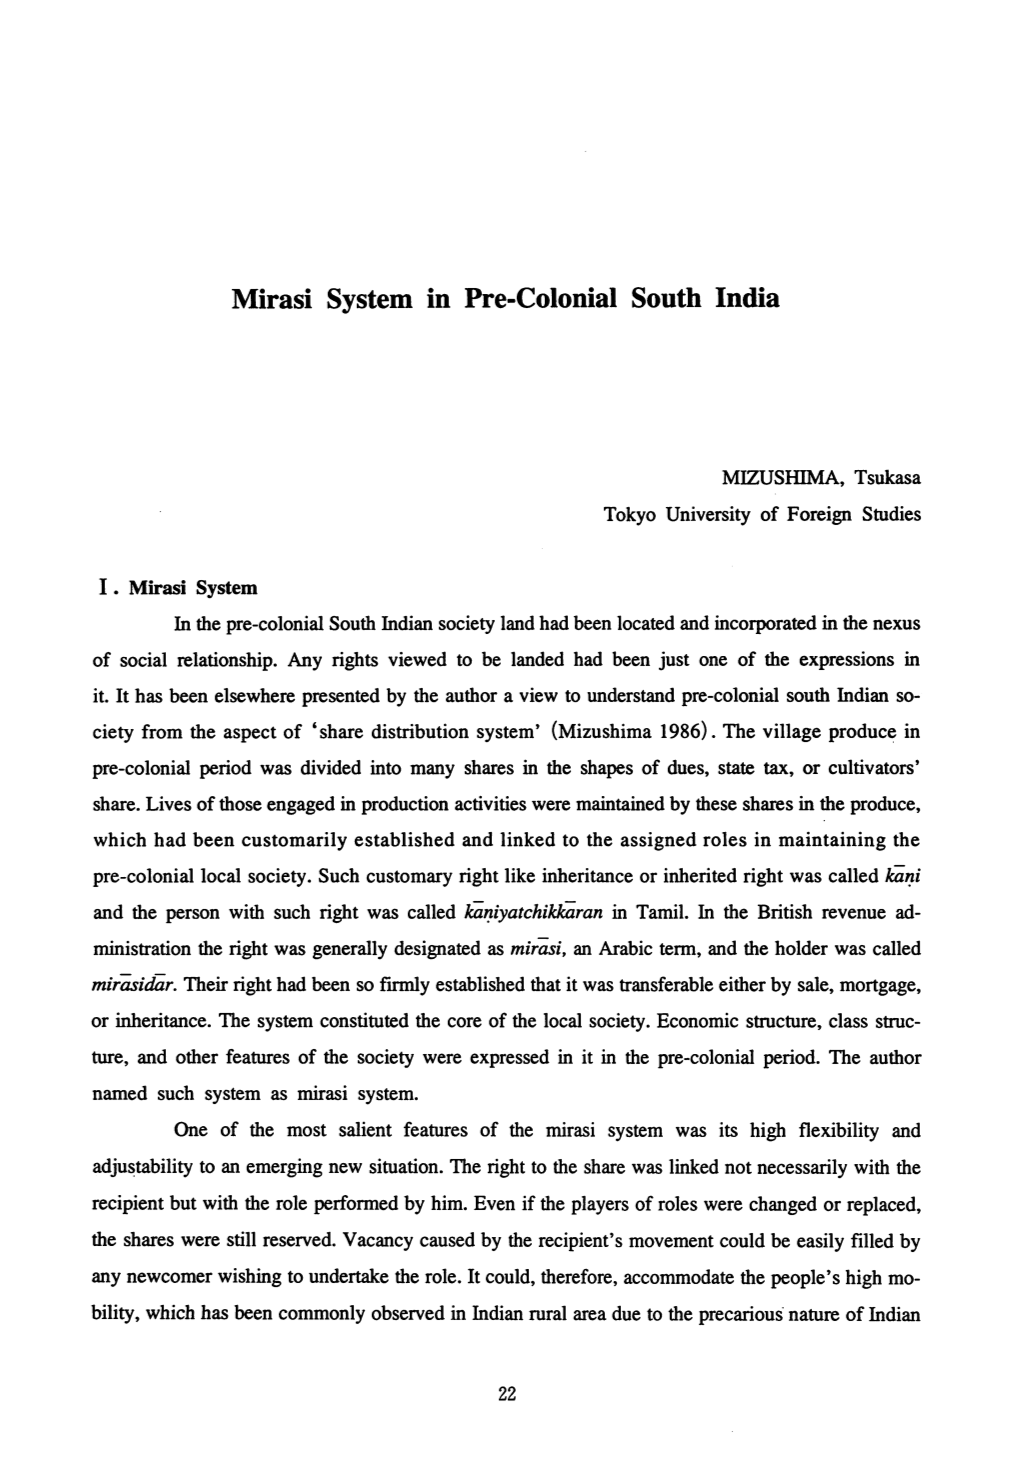 Mirasi System in Pre-Colonial South India